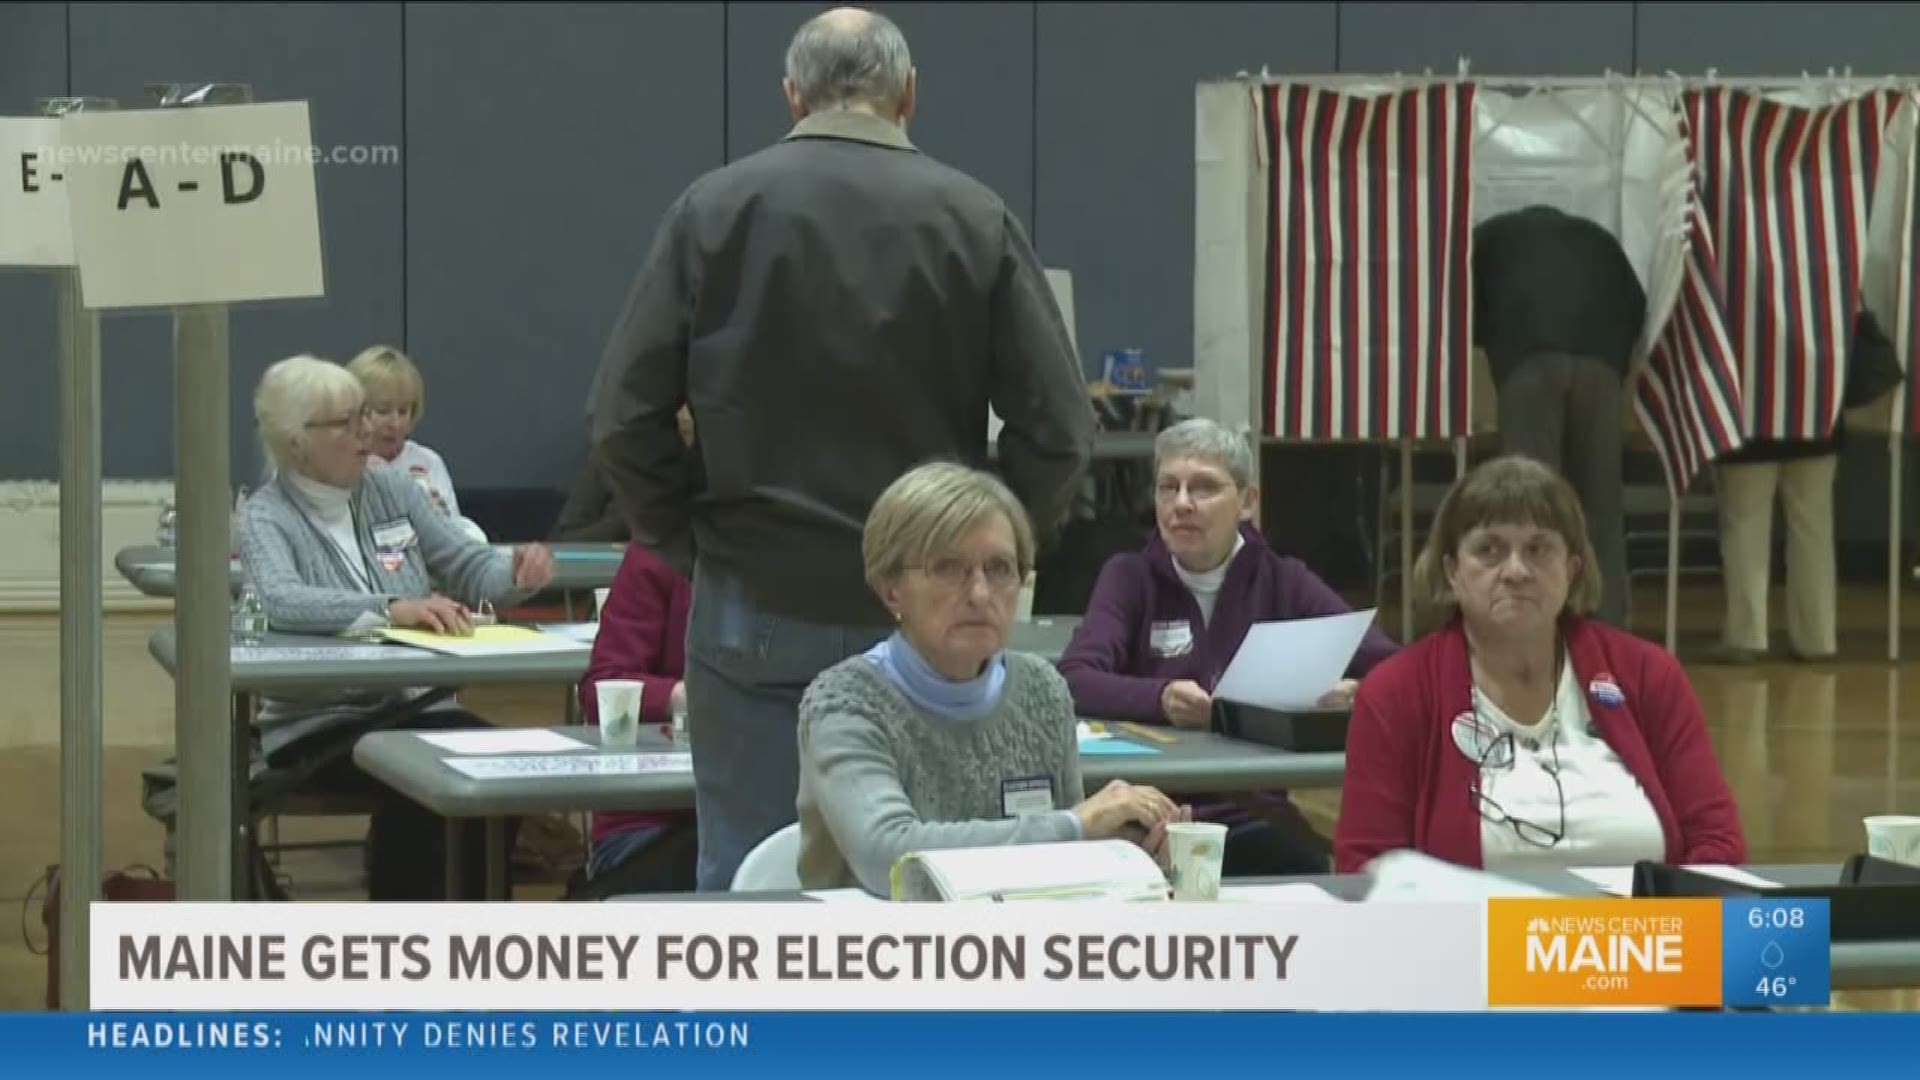 Maine will get $3M for election security